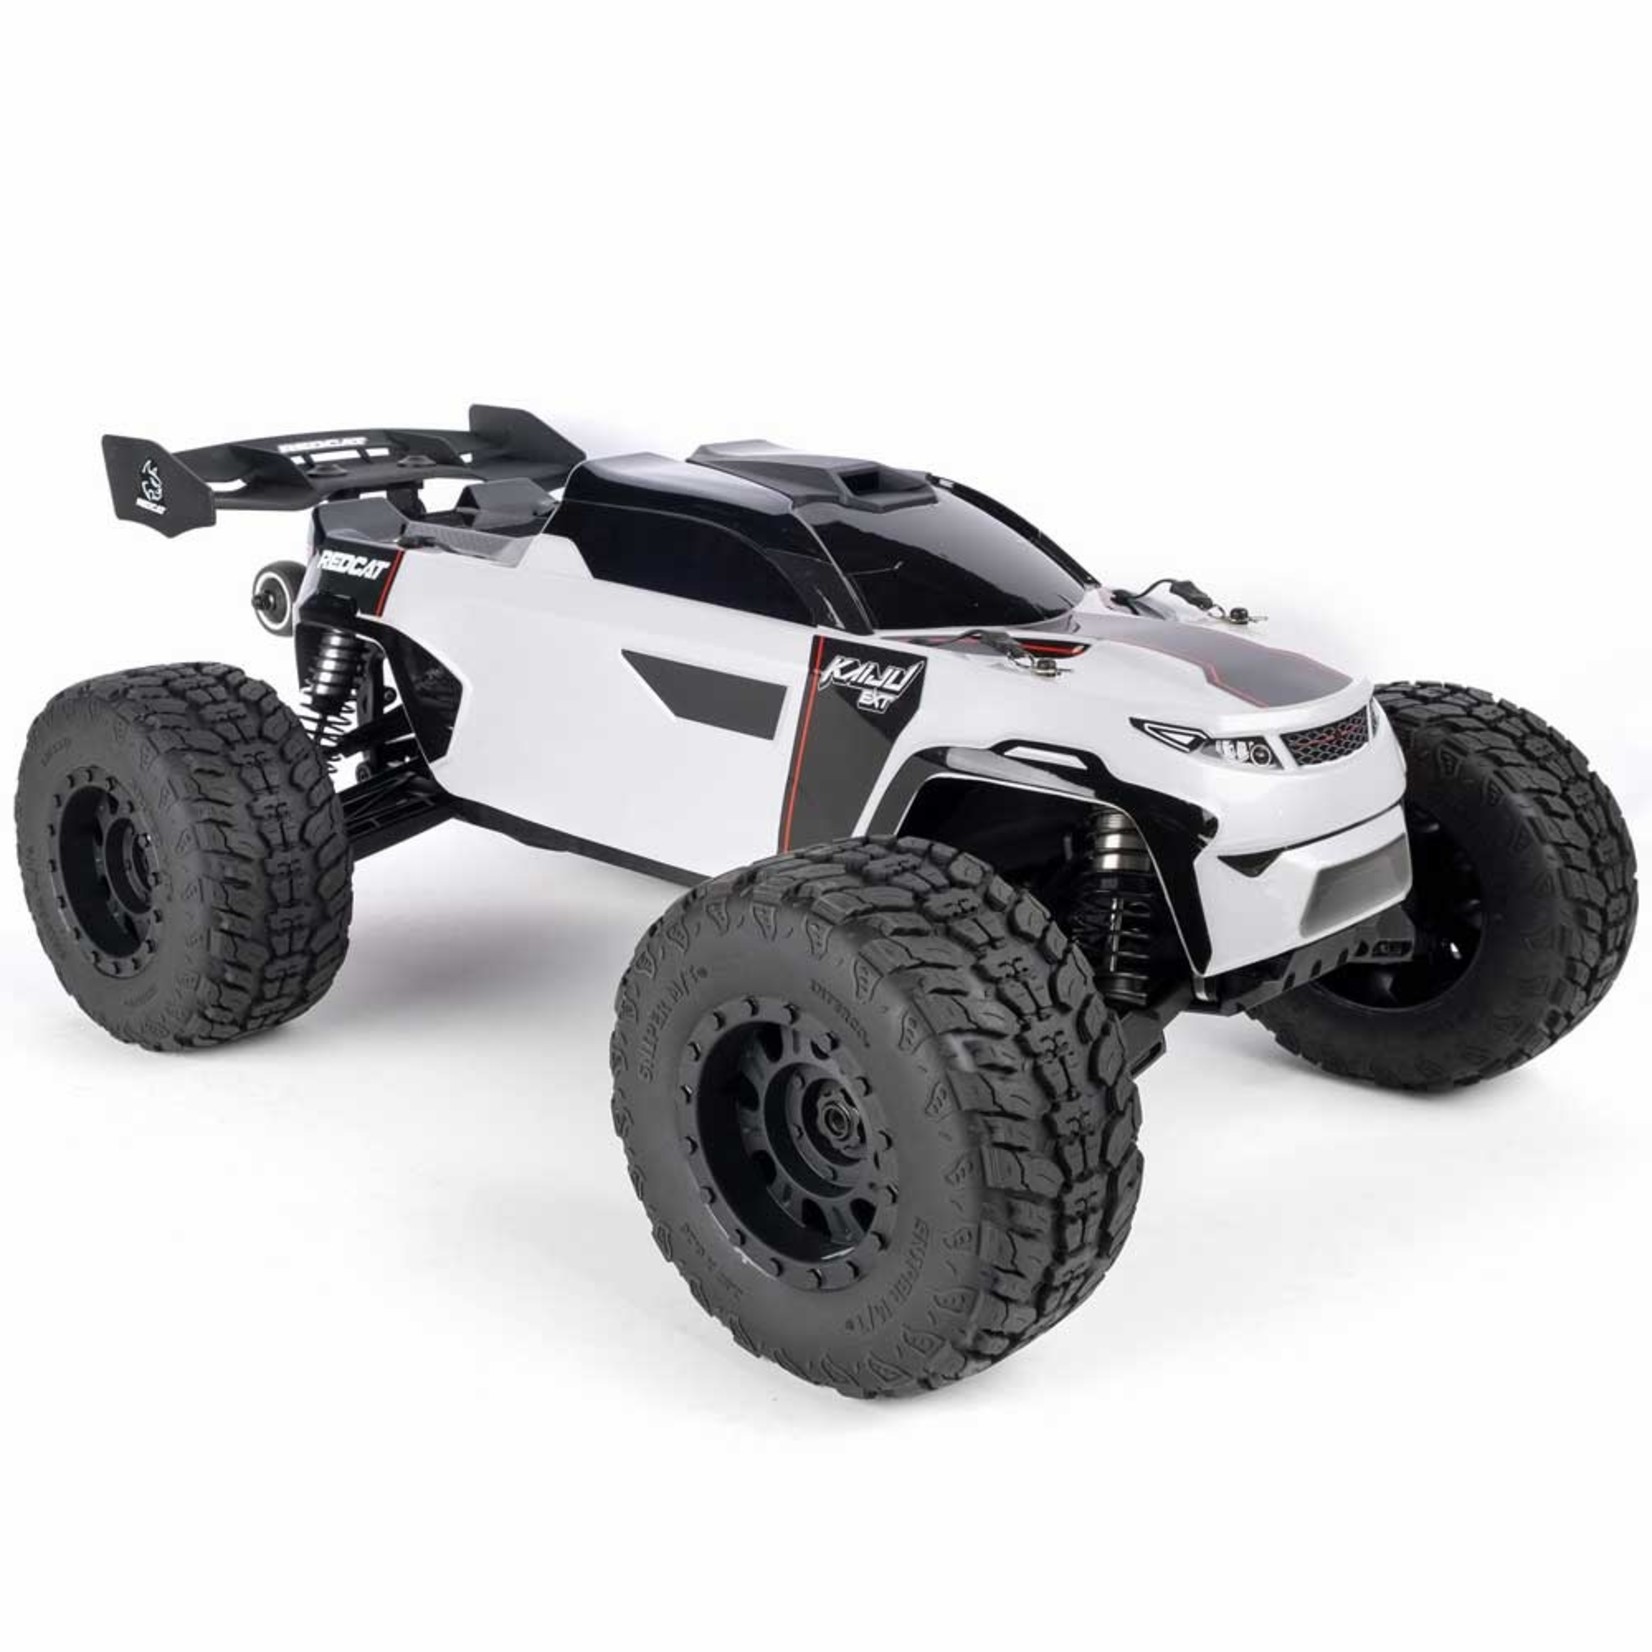 Redcat Racing KAIJU- WHITE : RER14420 Redcat KAIJU EXT 1/8 Scale 6S Ready Monster Truck